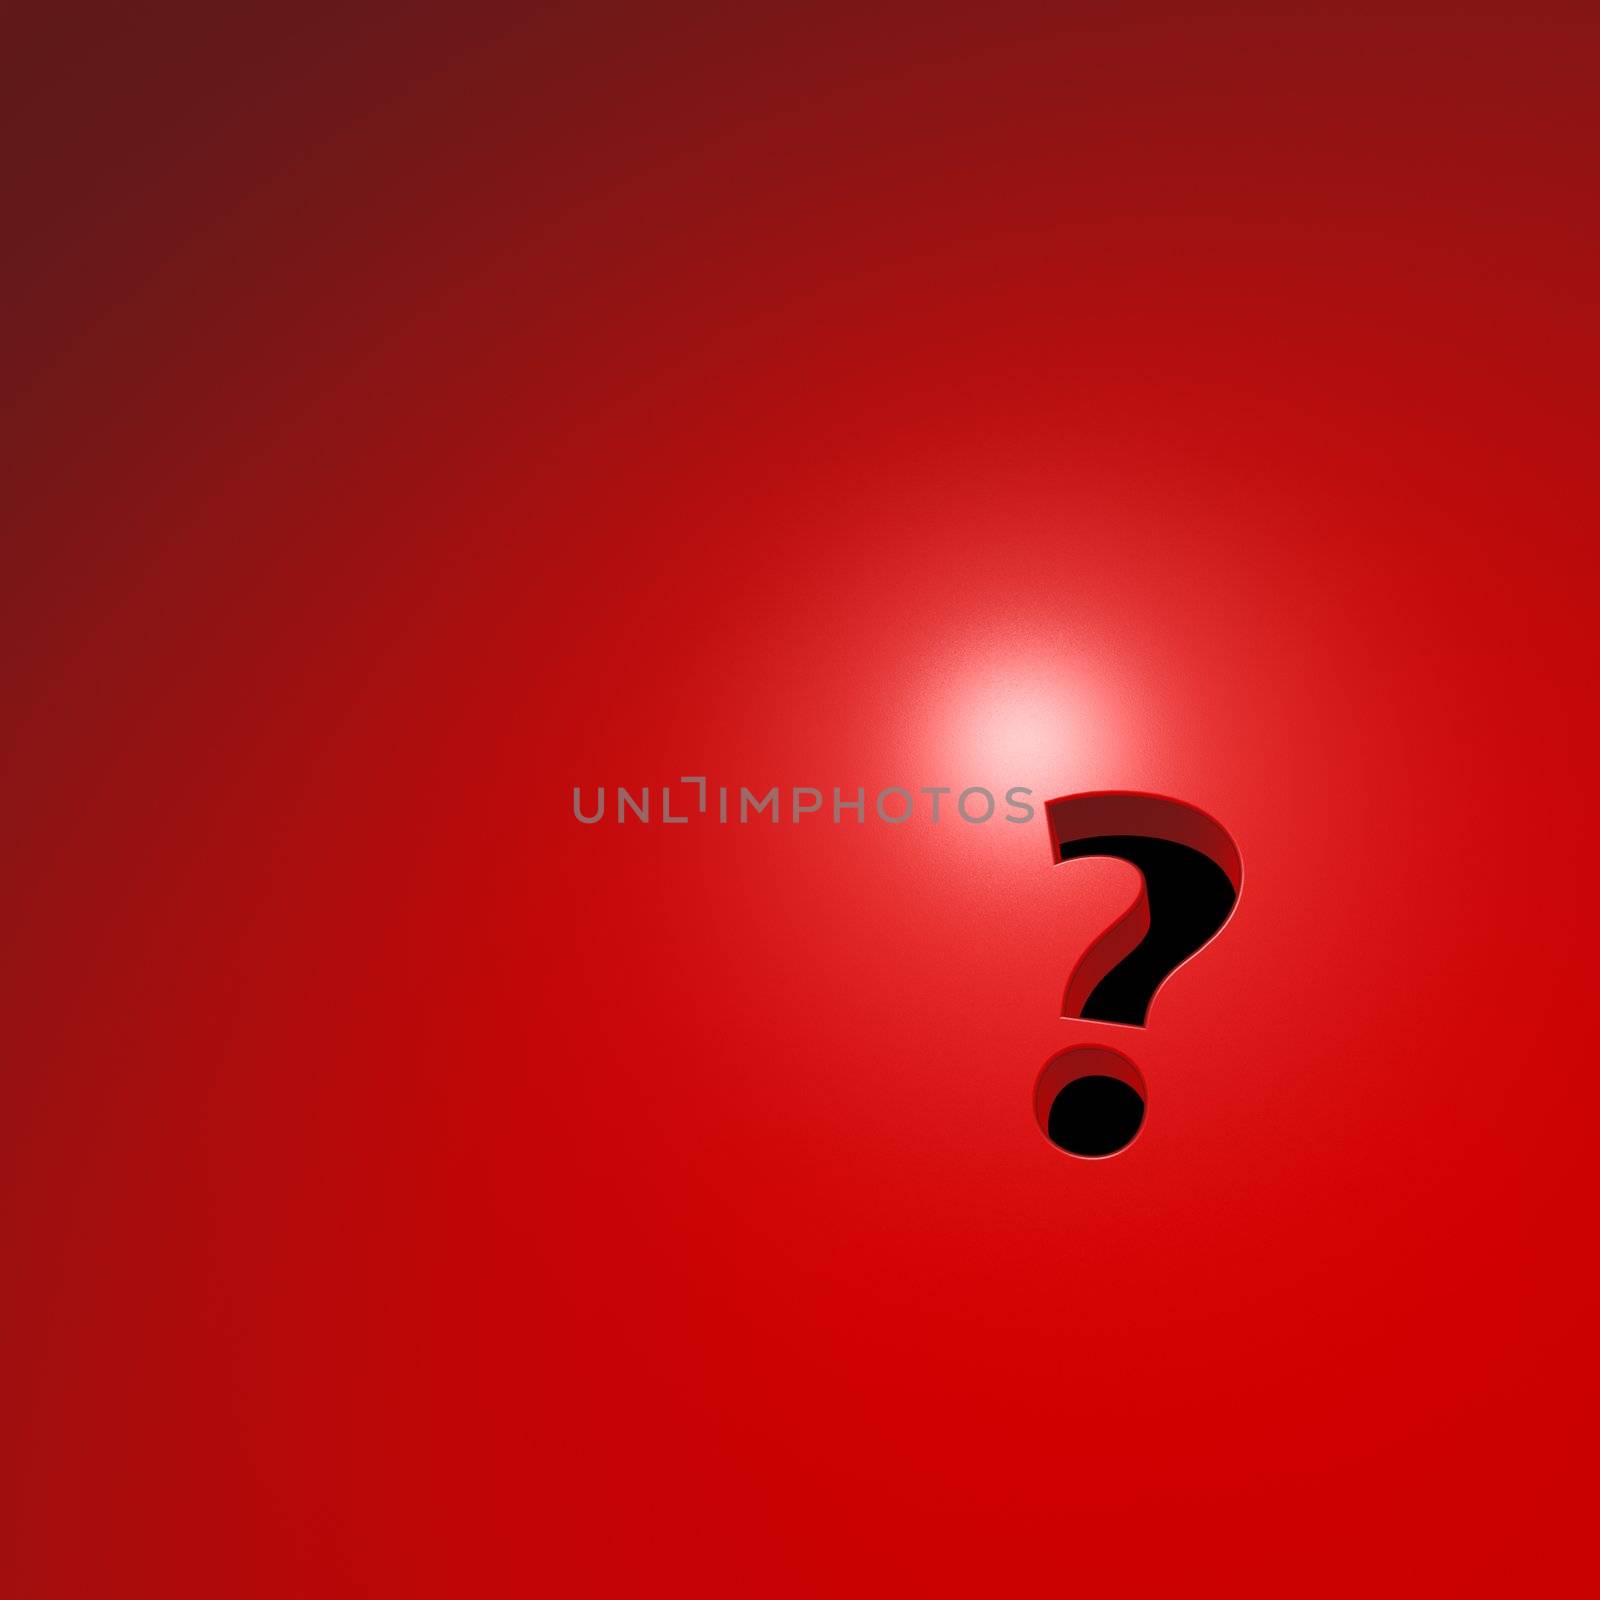 question mark hole on red background - 3d illustration